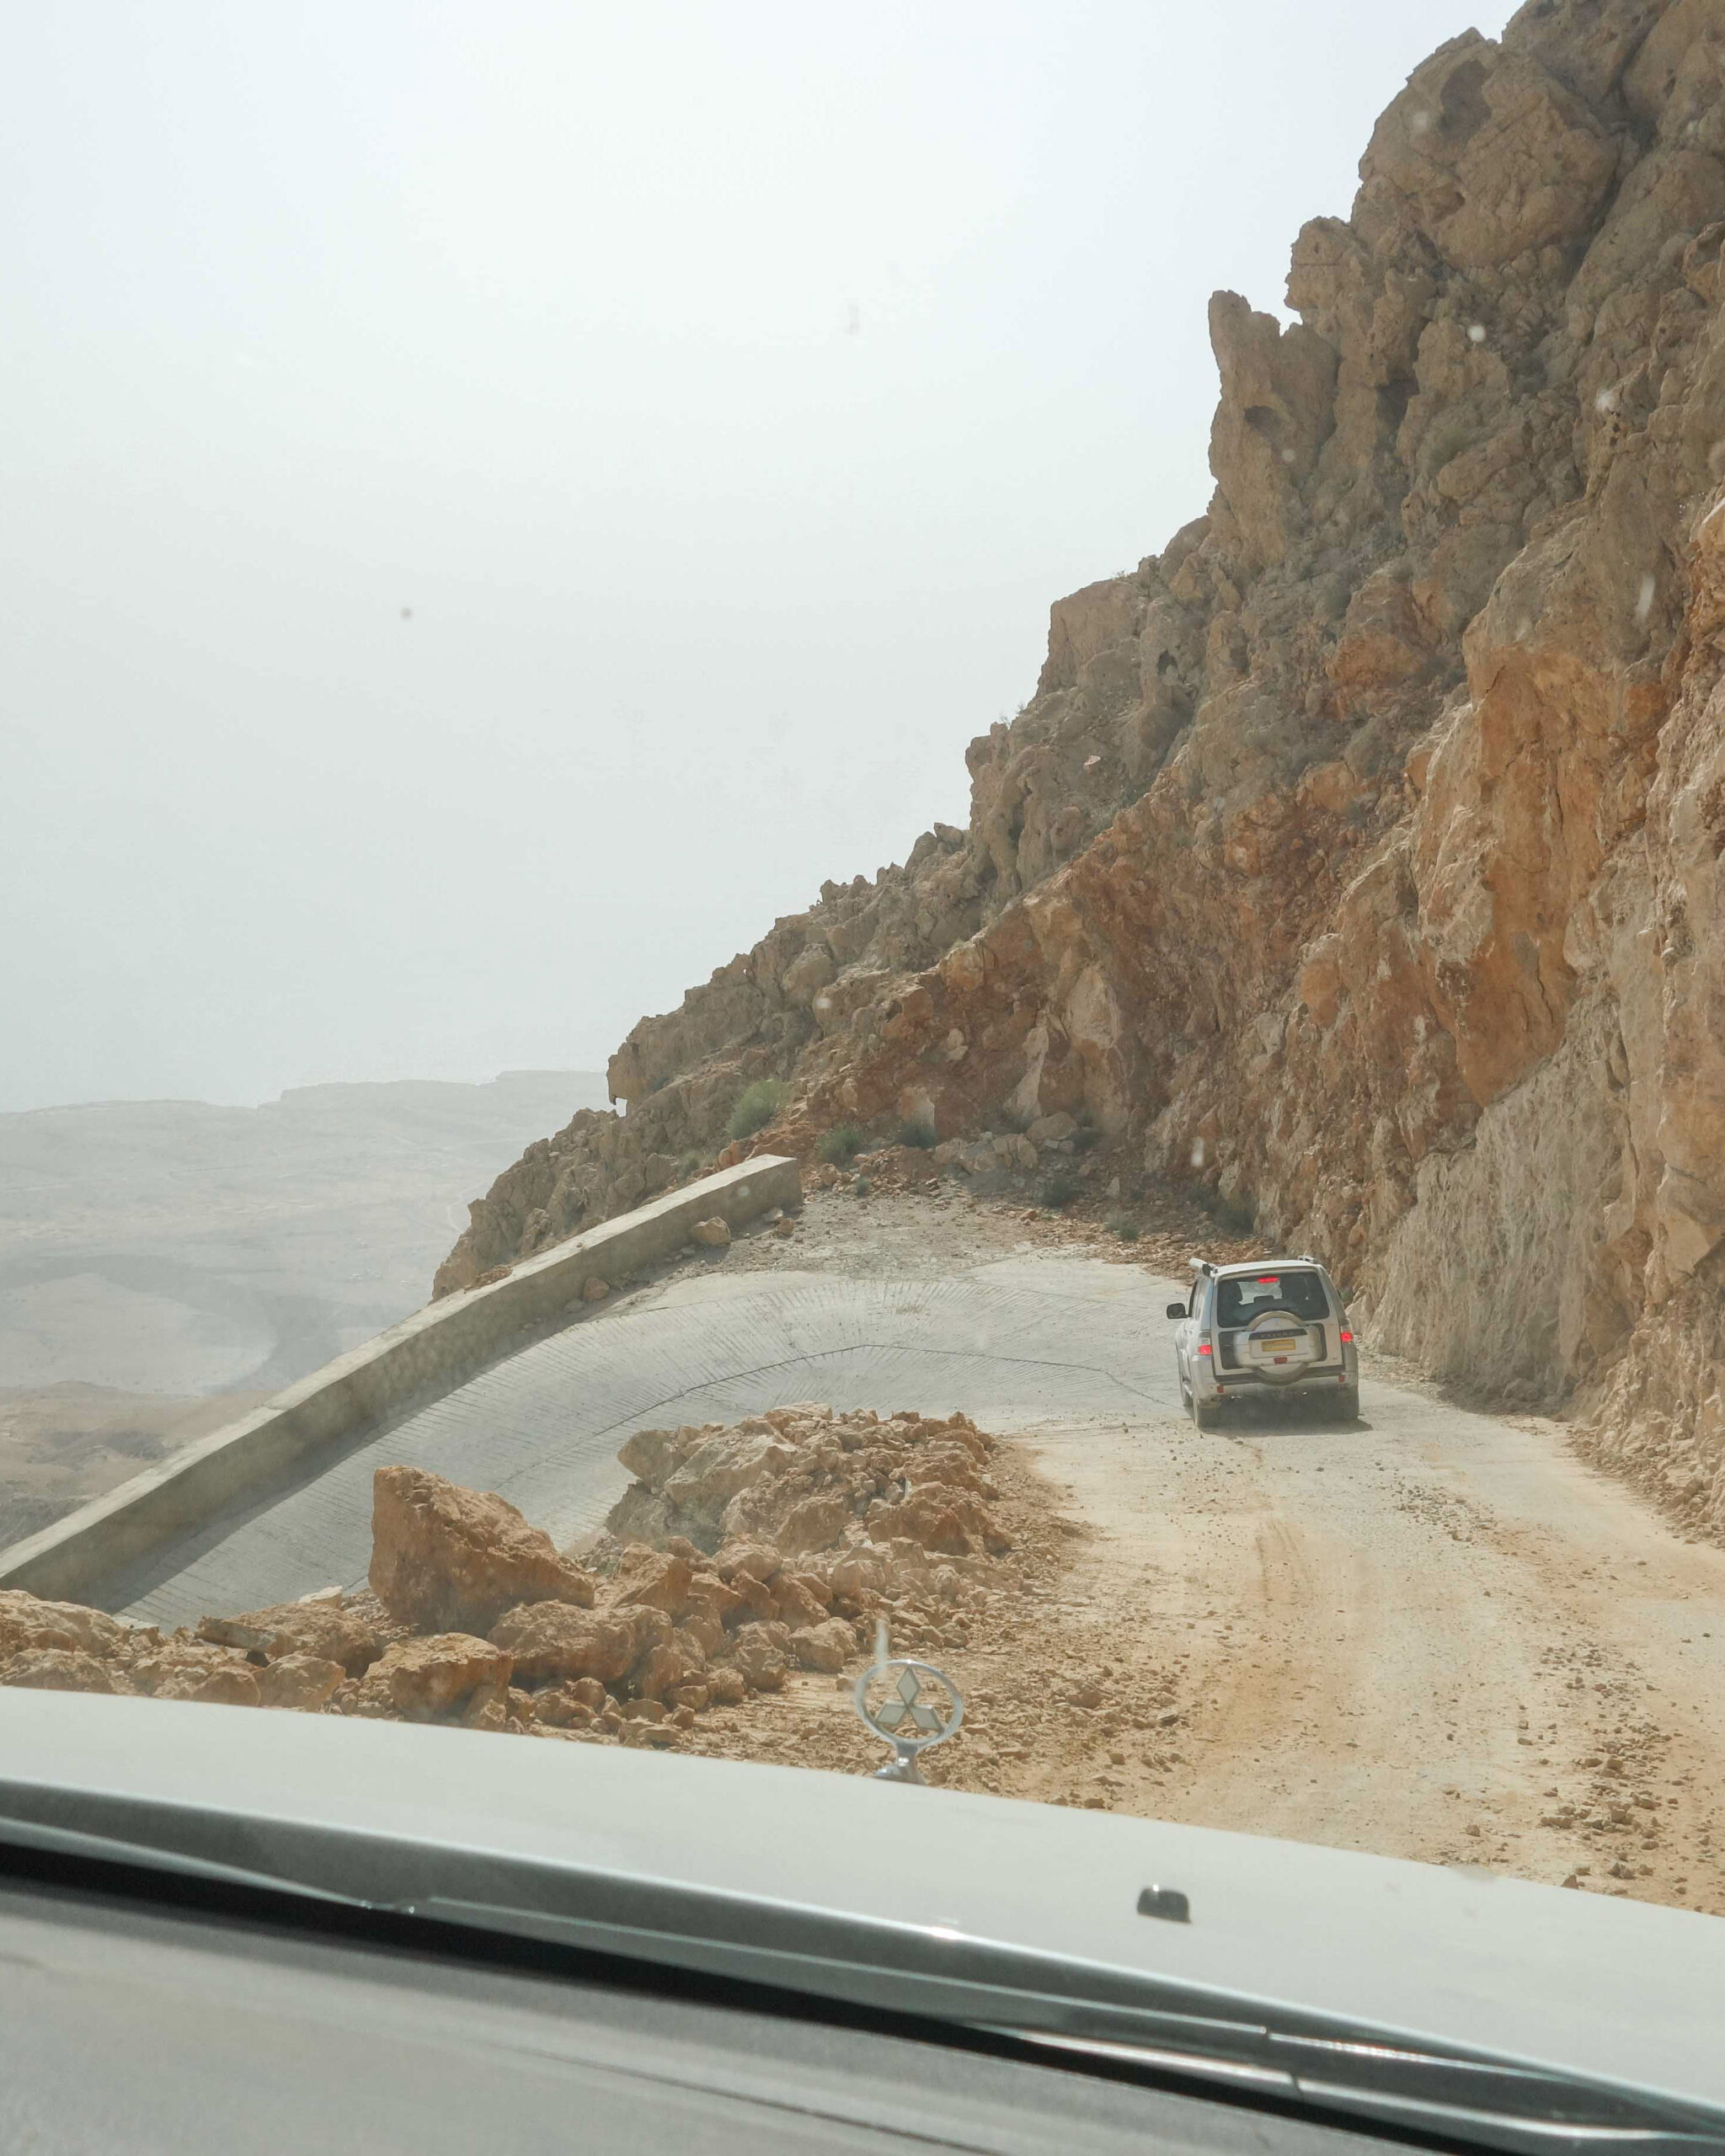 OMAN’S BEST OFF ROAD ROUTES – INCLUDING CAMPING SPOTS AND GPS COORDINATES